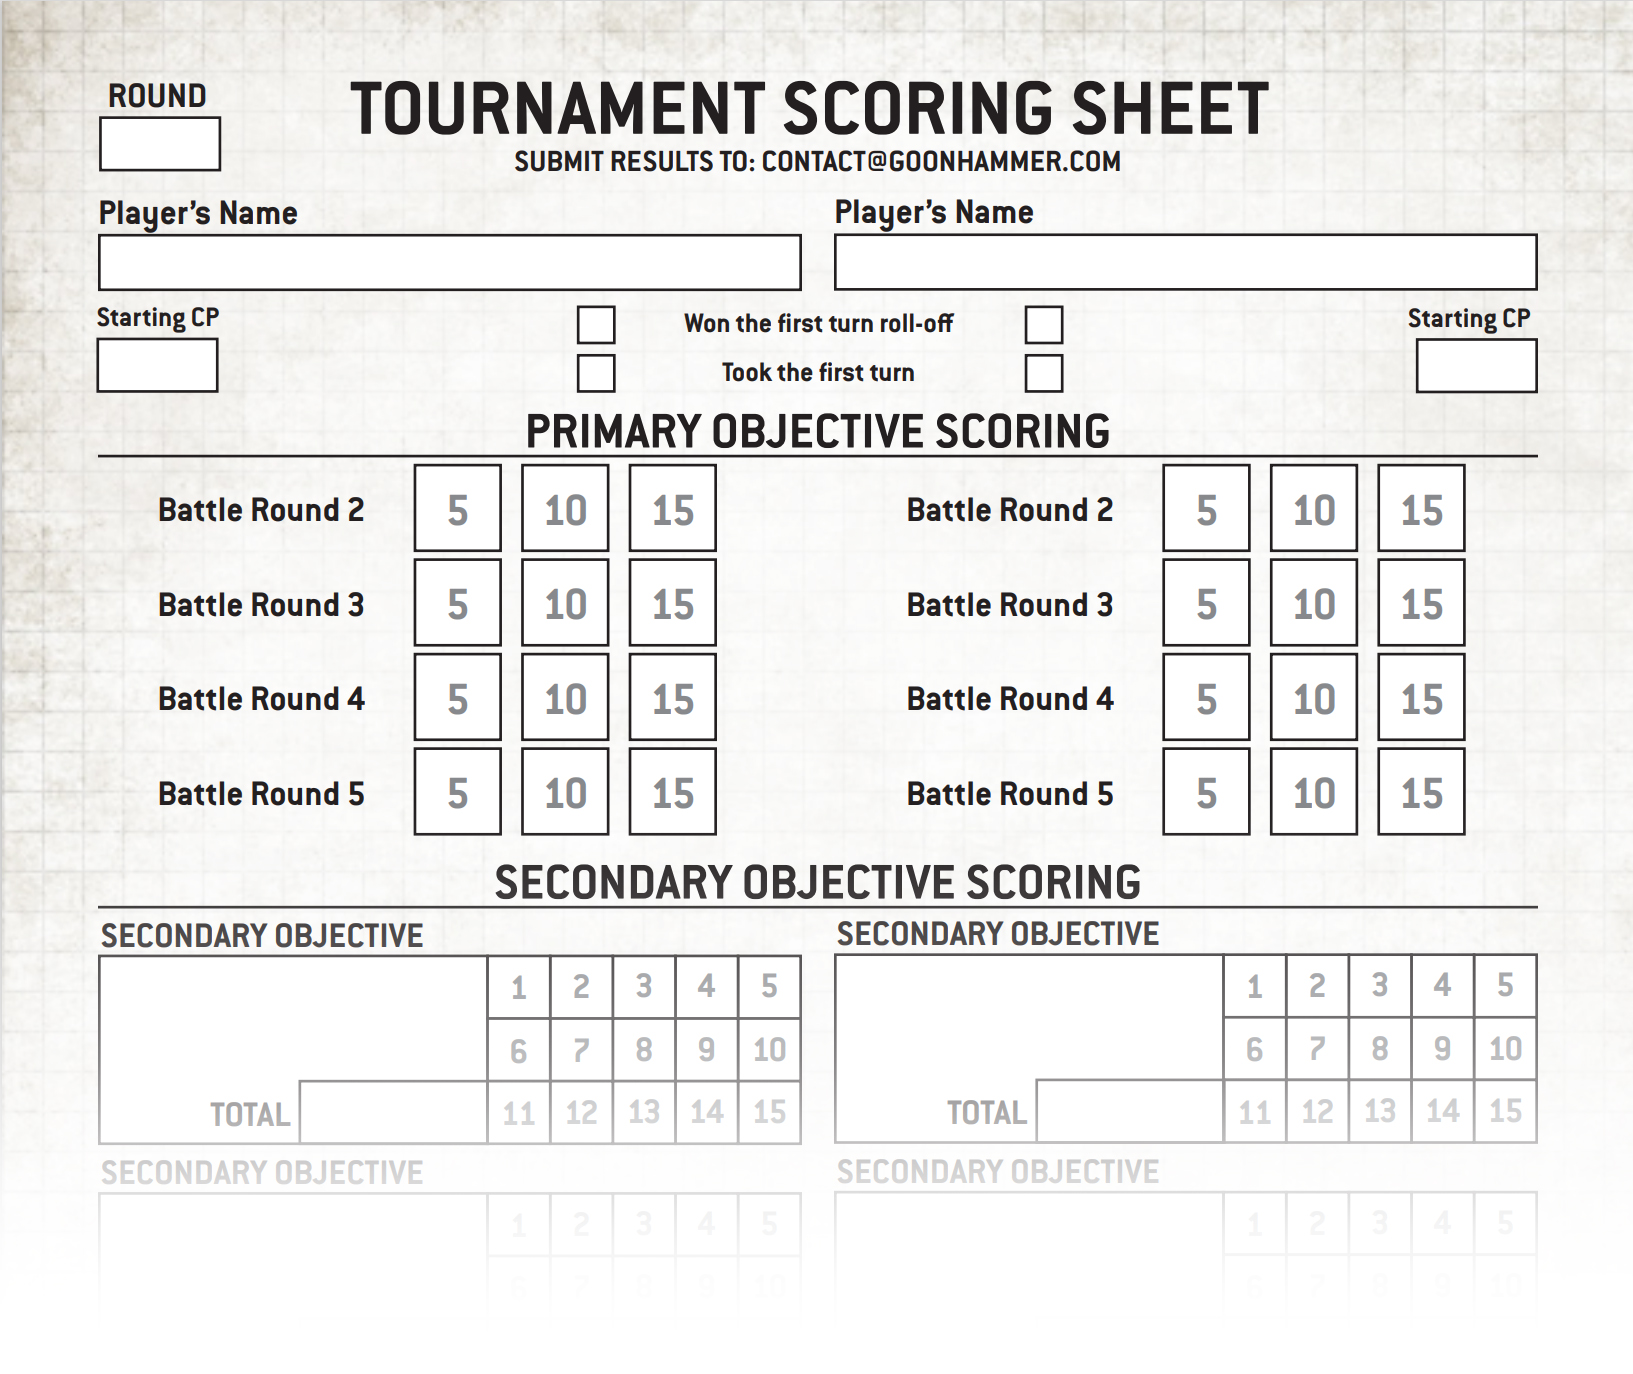 Download A Printable Scoring Sheet for 9th Edition - Goonhammer